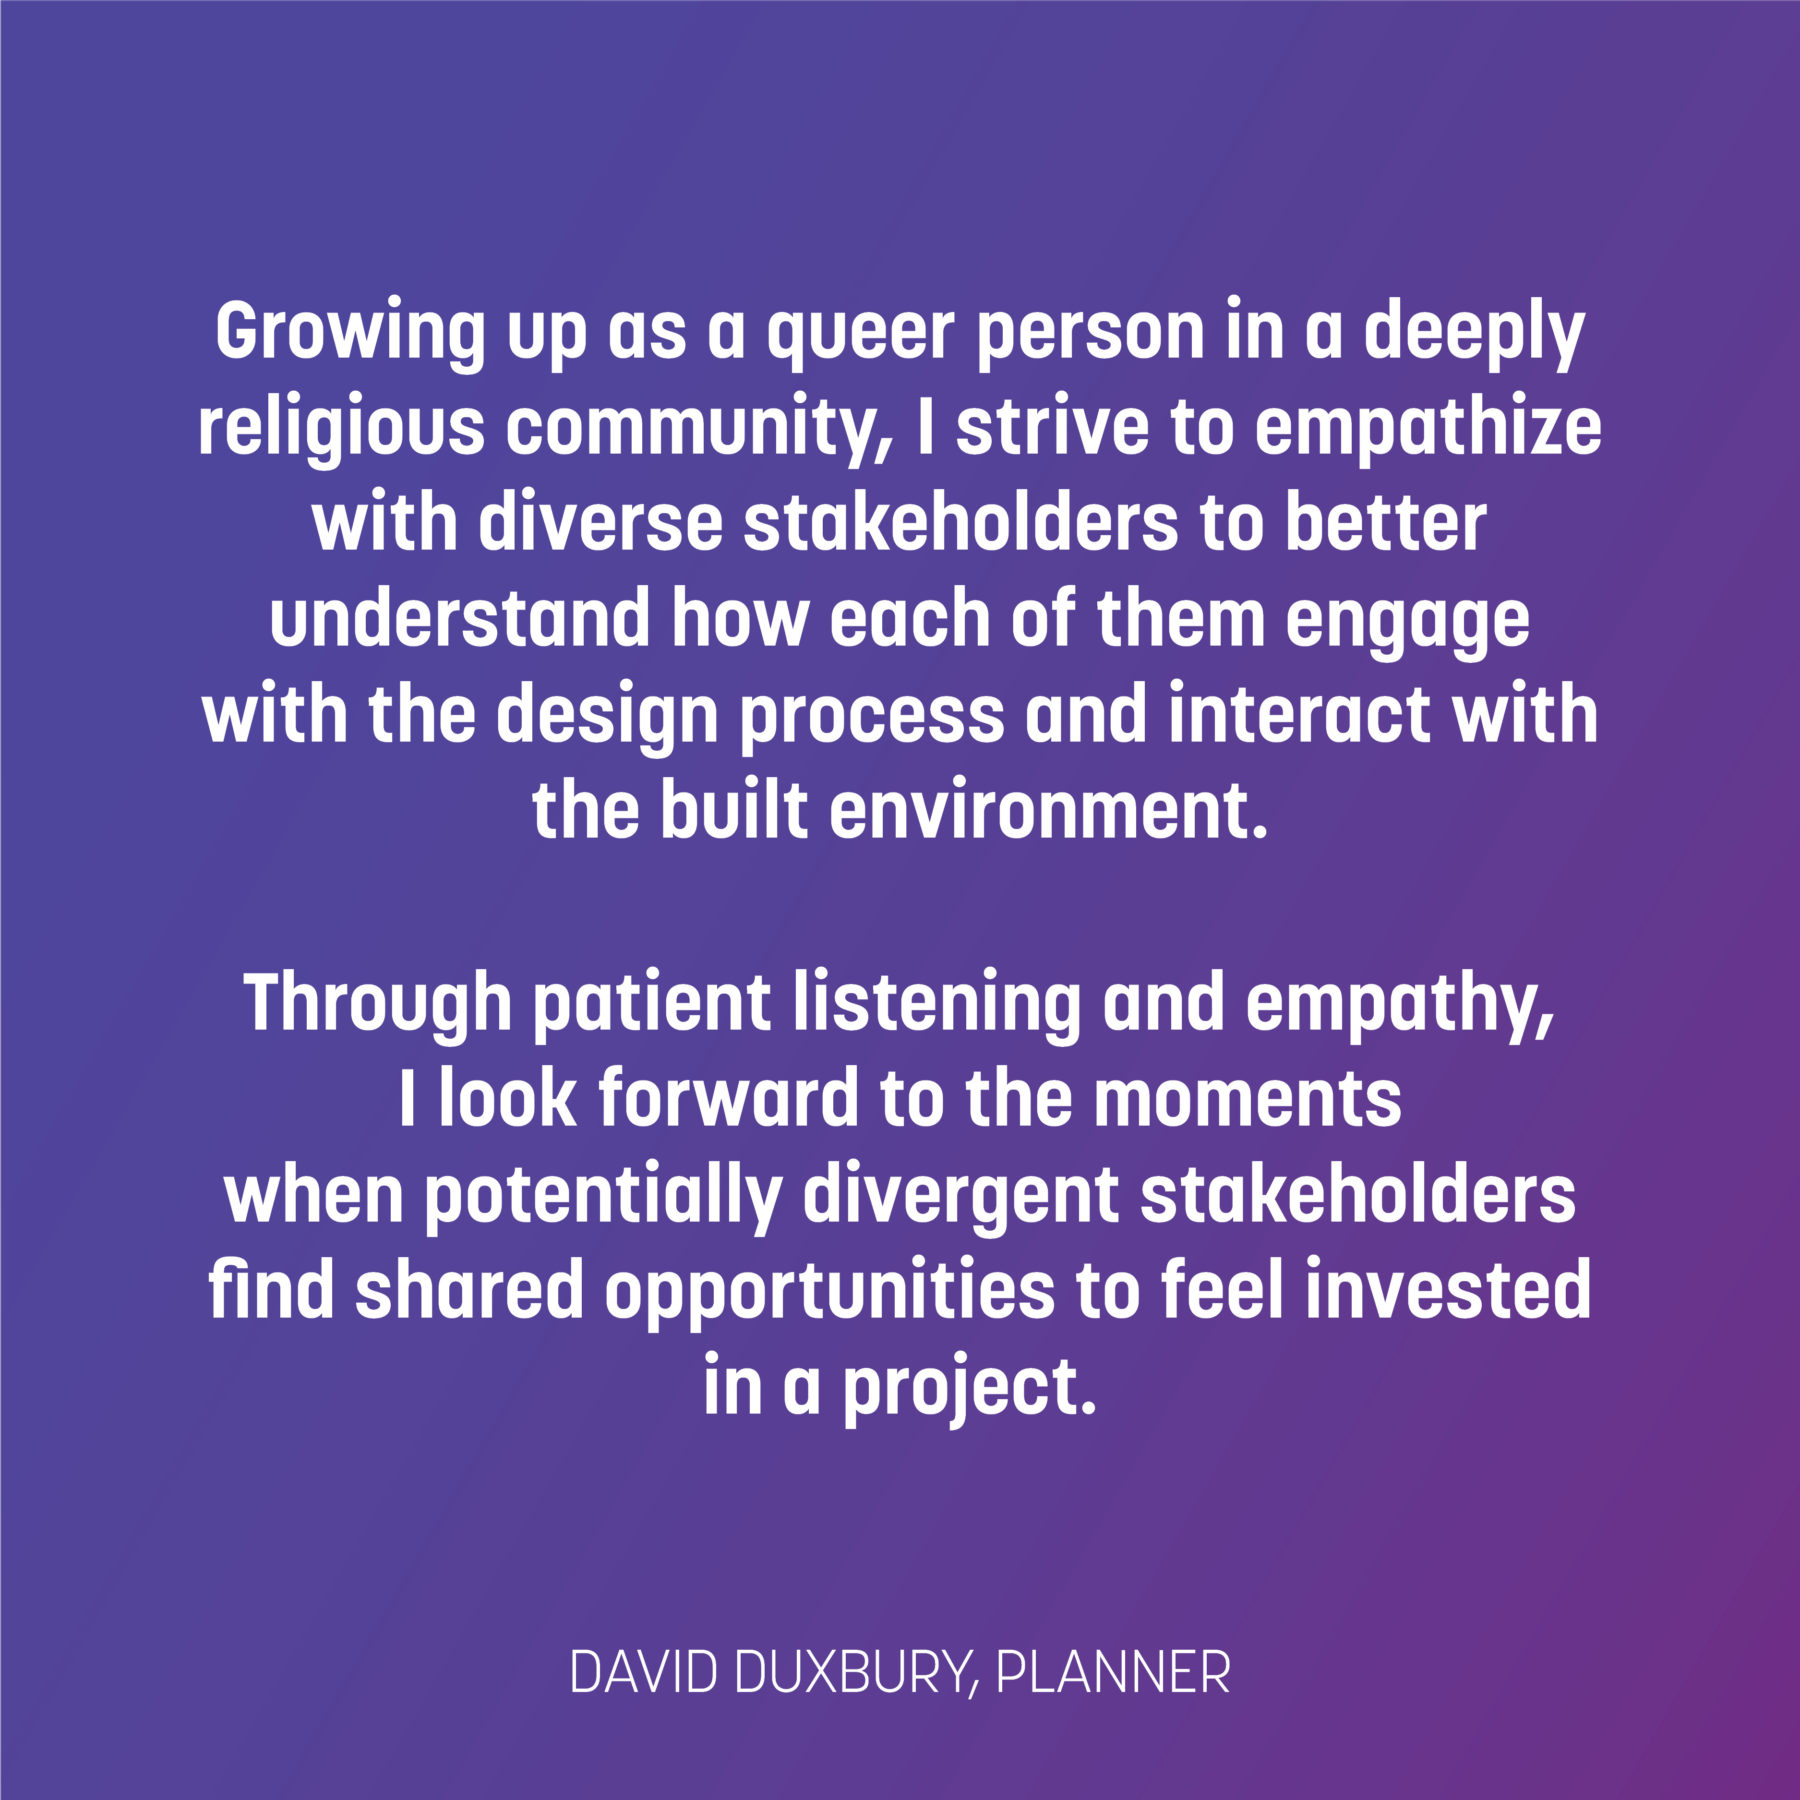 Text on blue to purple gradient reads: Growing up as a queer person in a deeply religious community, I strive to empathize with diverse stakeholders to better understand how each of them engage with the design process and interact with the built environment. Through patient listening and empathy, I look forward to the moments when potentially divergent stakeholders find shared opportunities to feel invested in a project. -David Duxbury planner